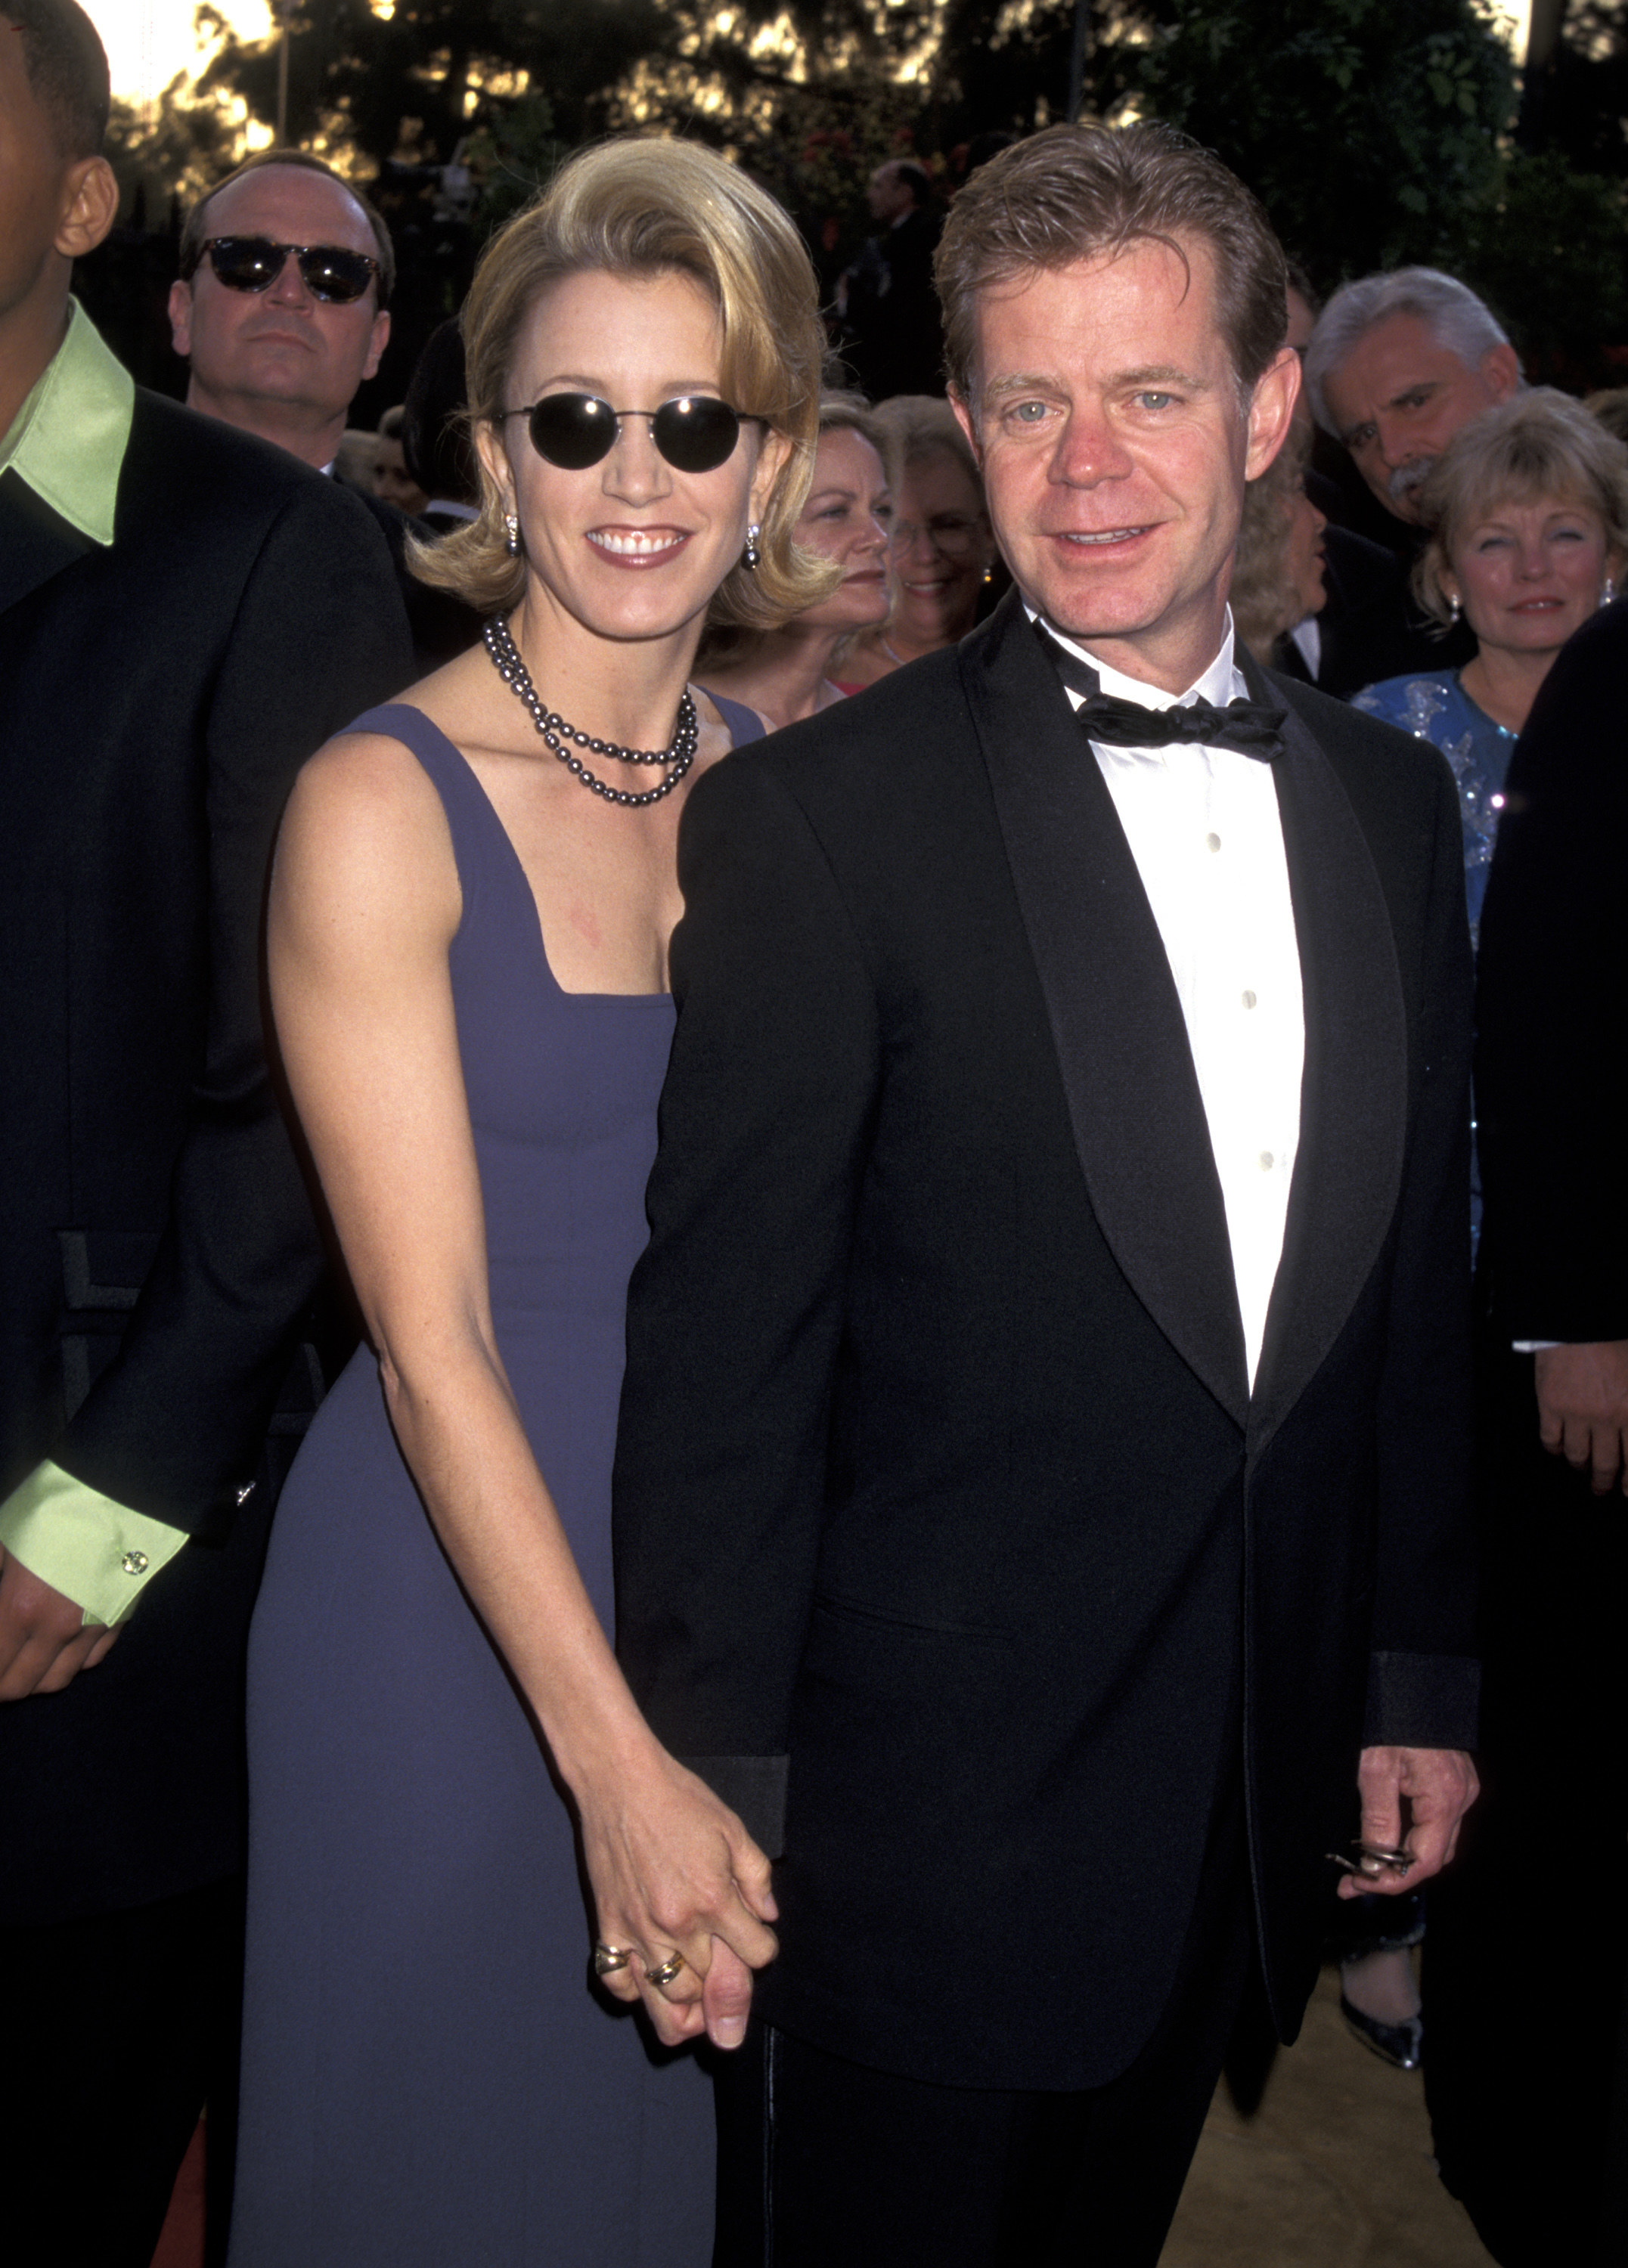 Felicity Huffman and William H. Macy